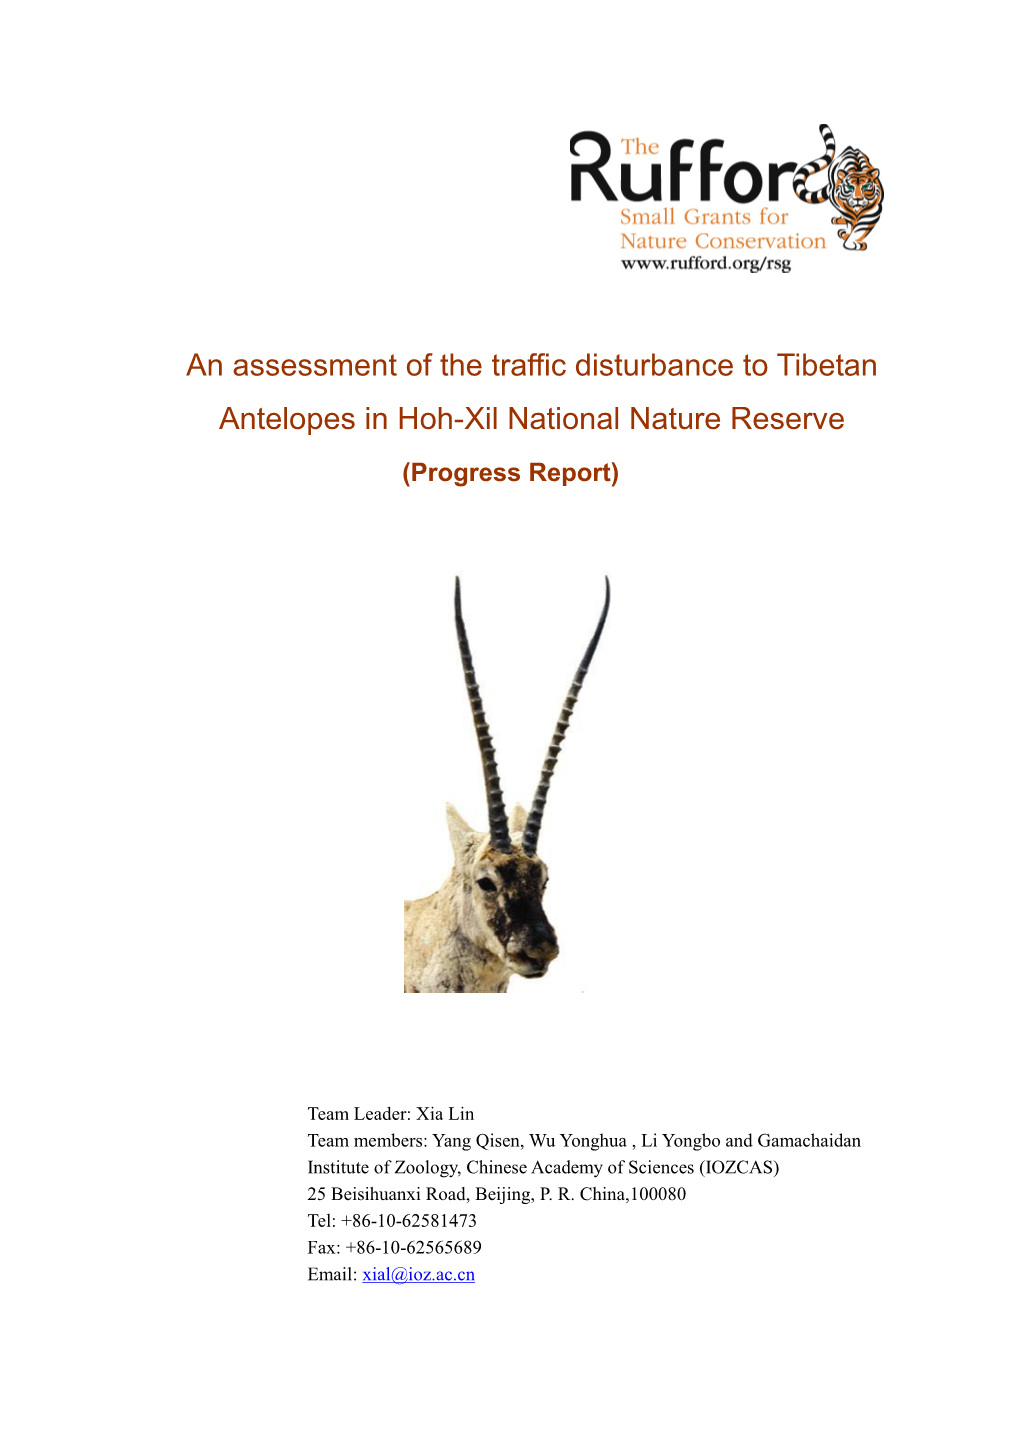 An Assessment of the Traffic Disturbance to Tibetan Antelopes in Hoh-Xil National Nature Reserve